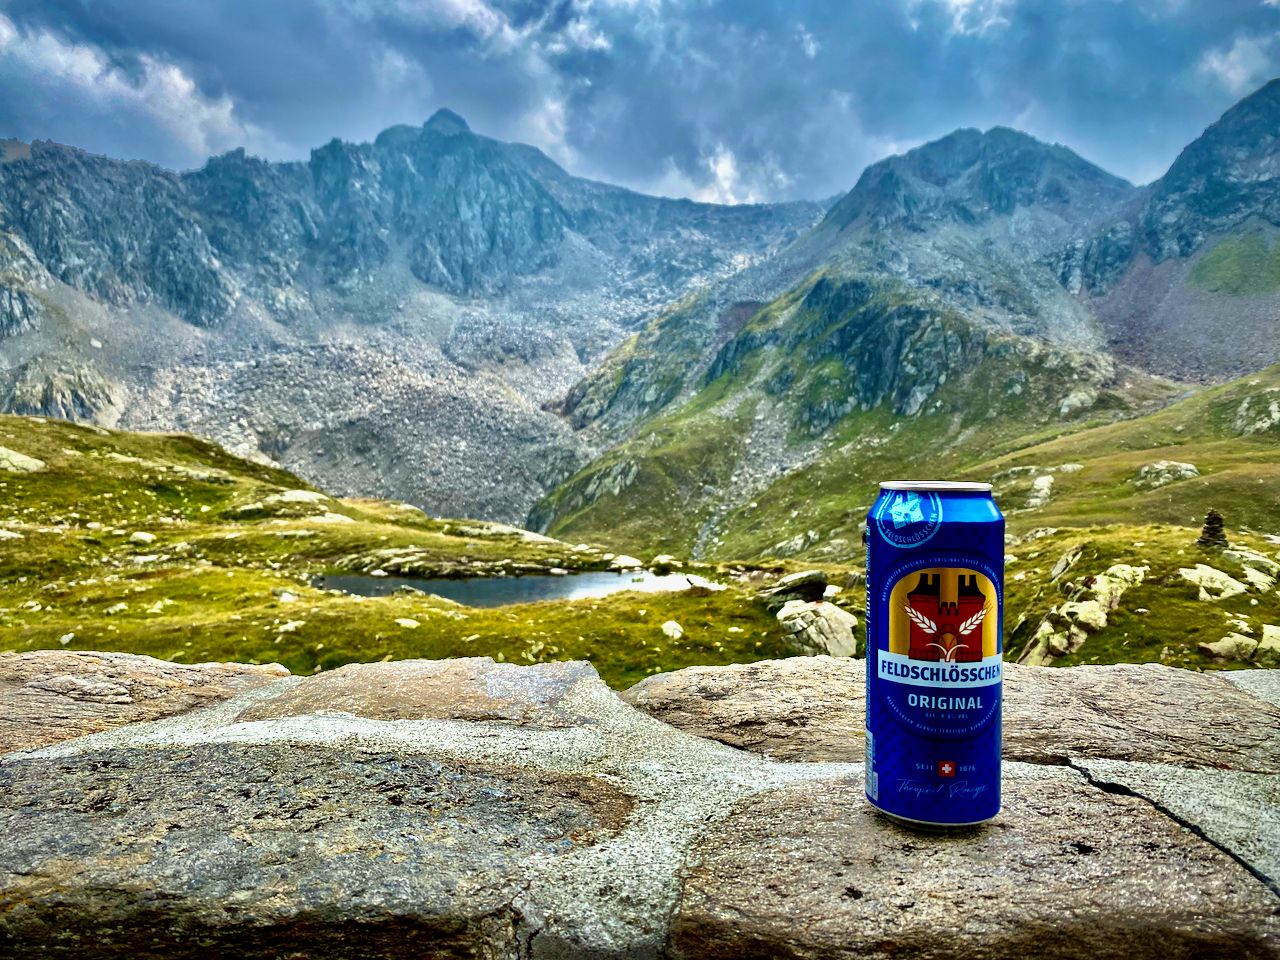 A can of Feldschlösschen beer sitting on a stone wall with mountains in the background.